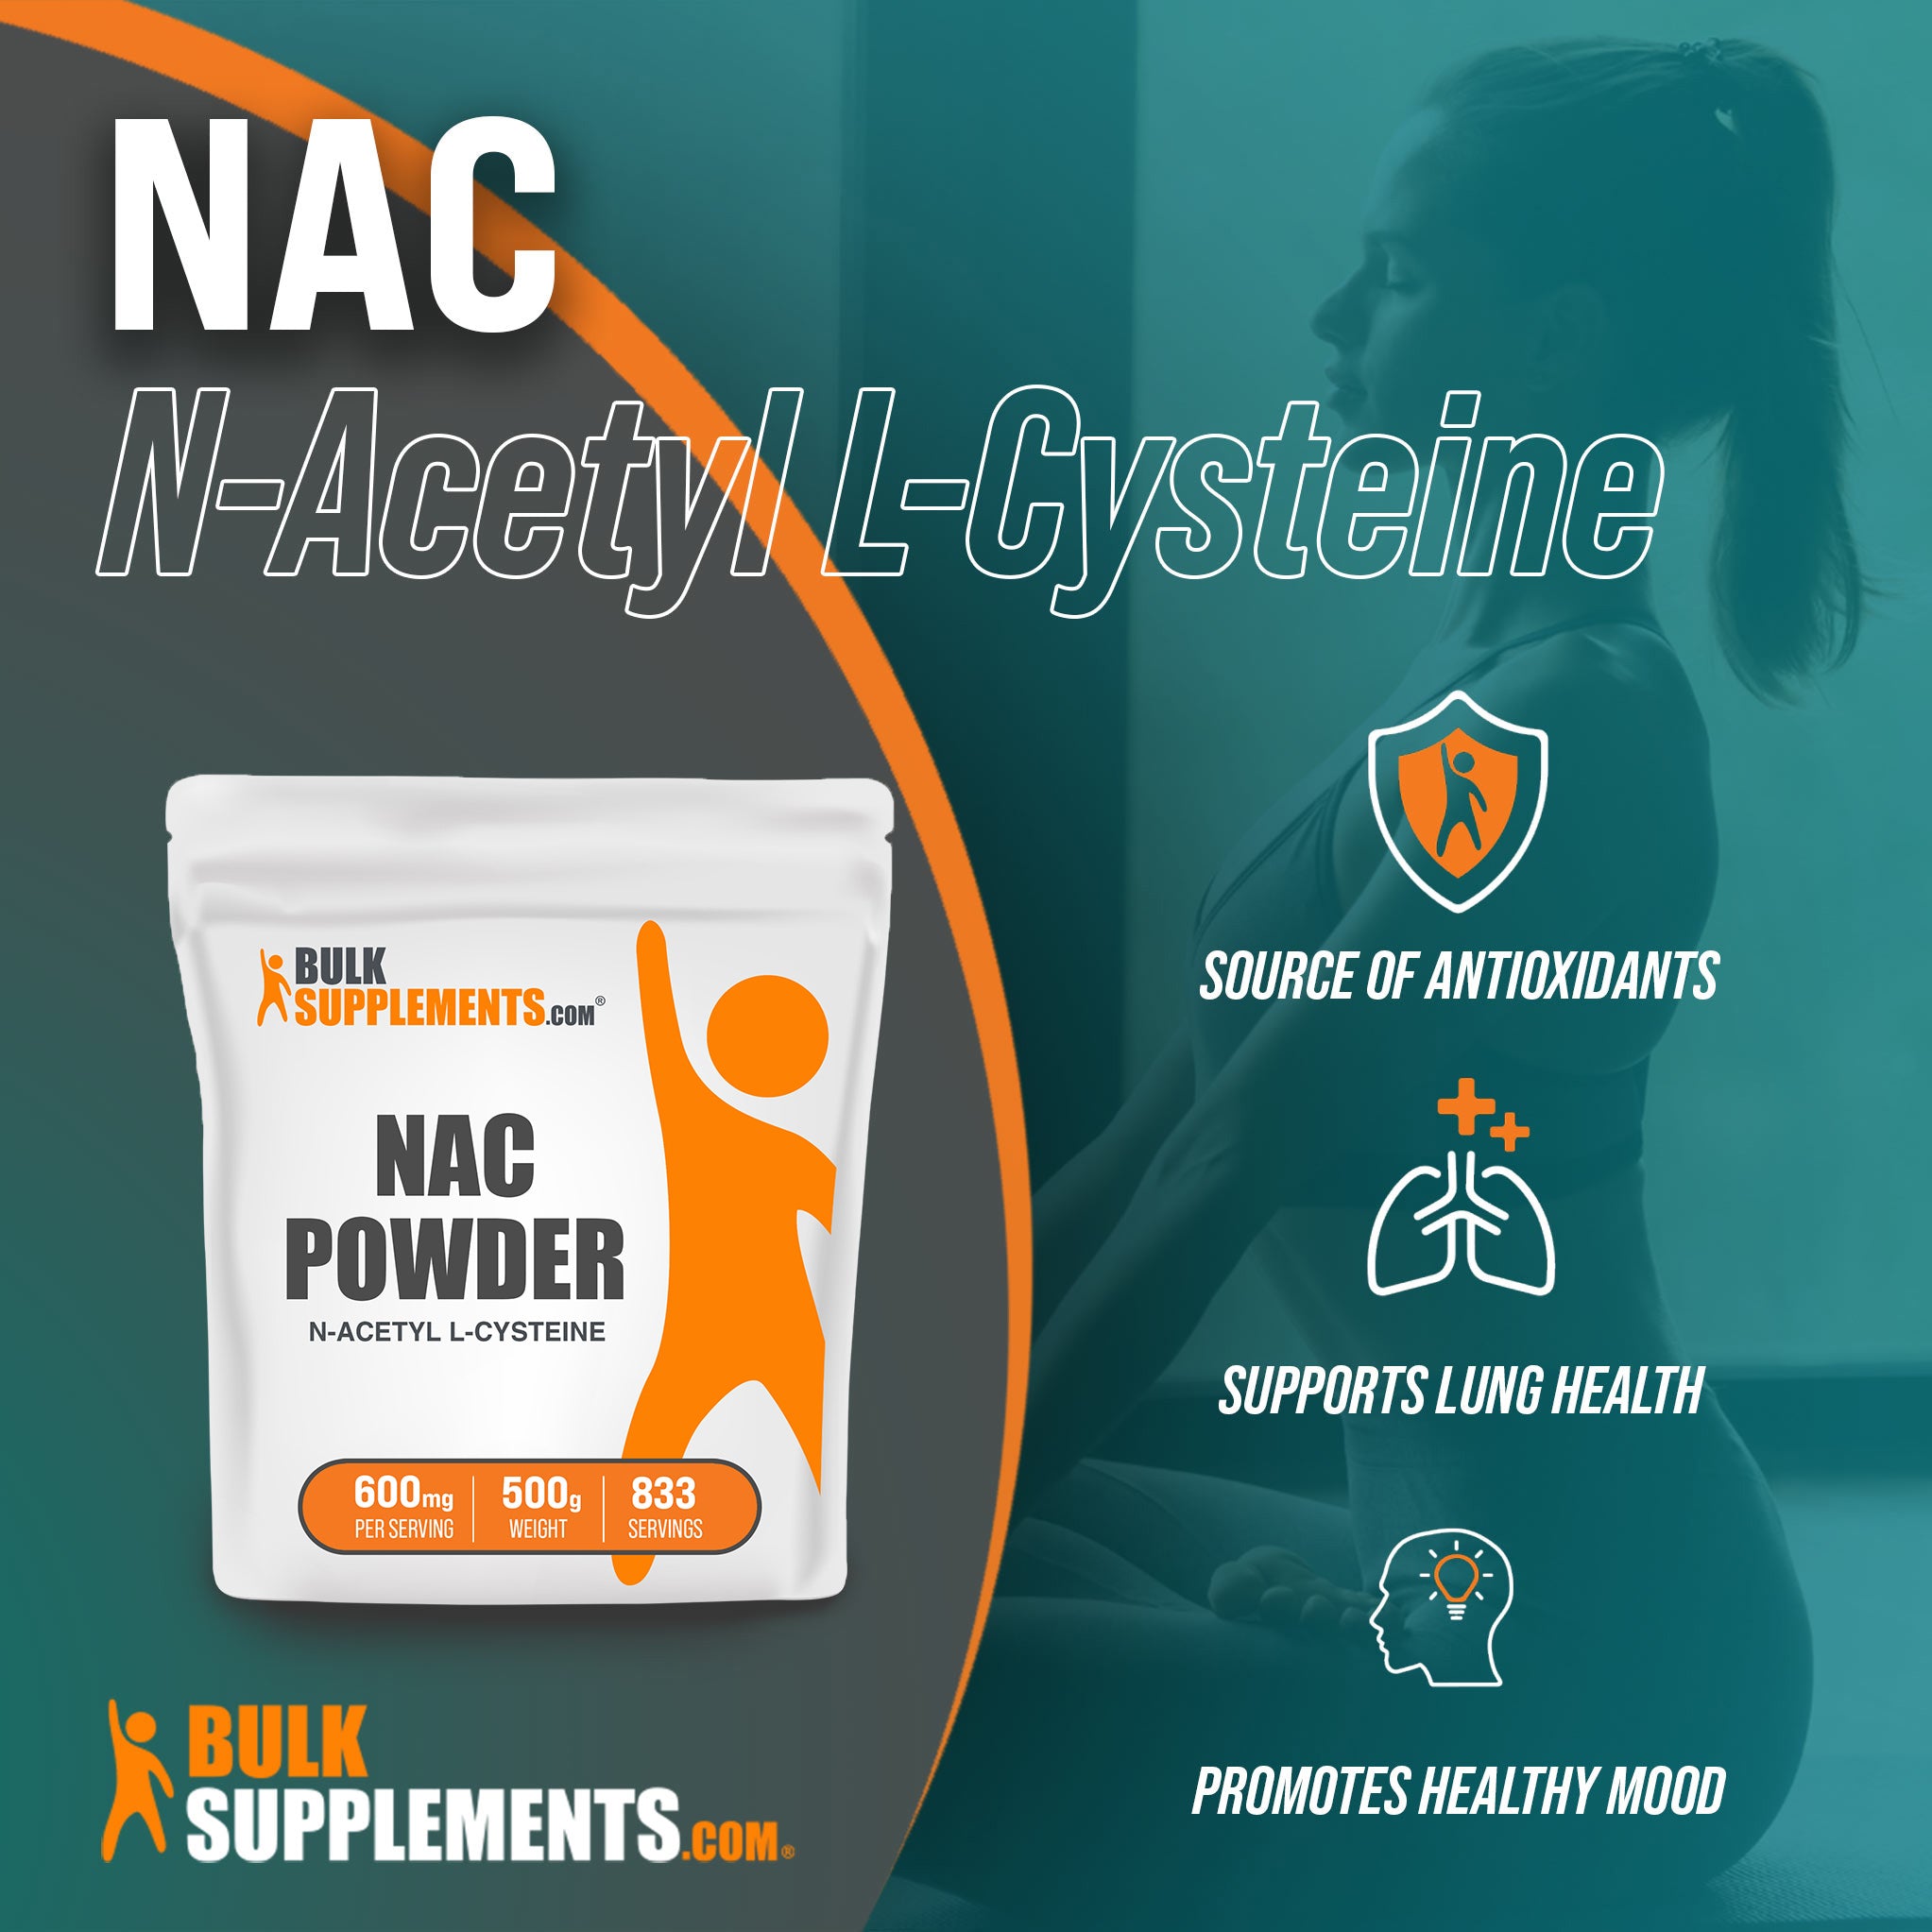 Benefits of NAC: source of antioxidants, supports lung health, promotes healthy mood